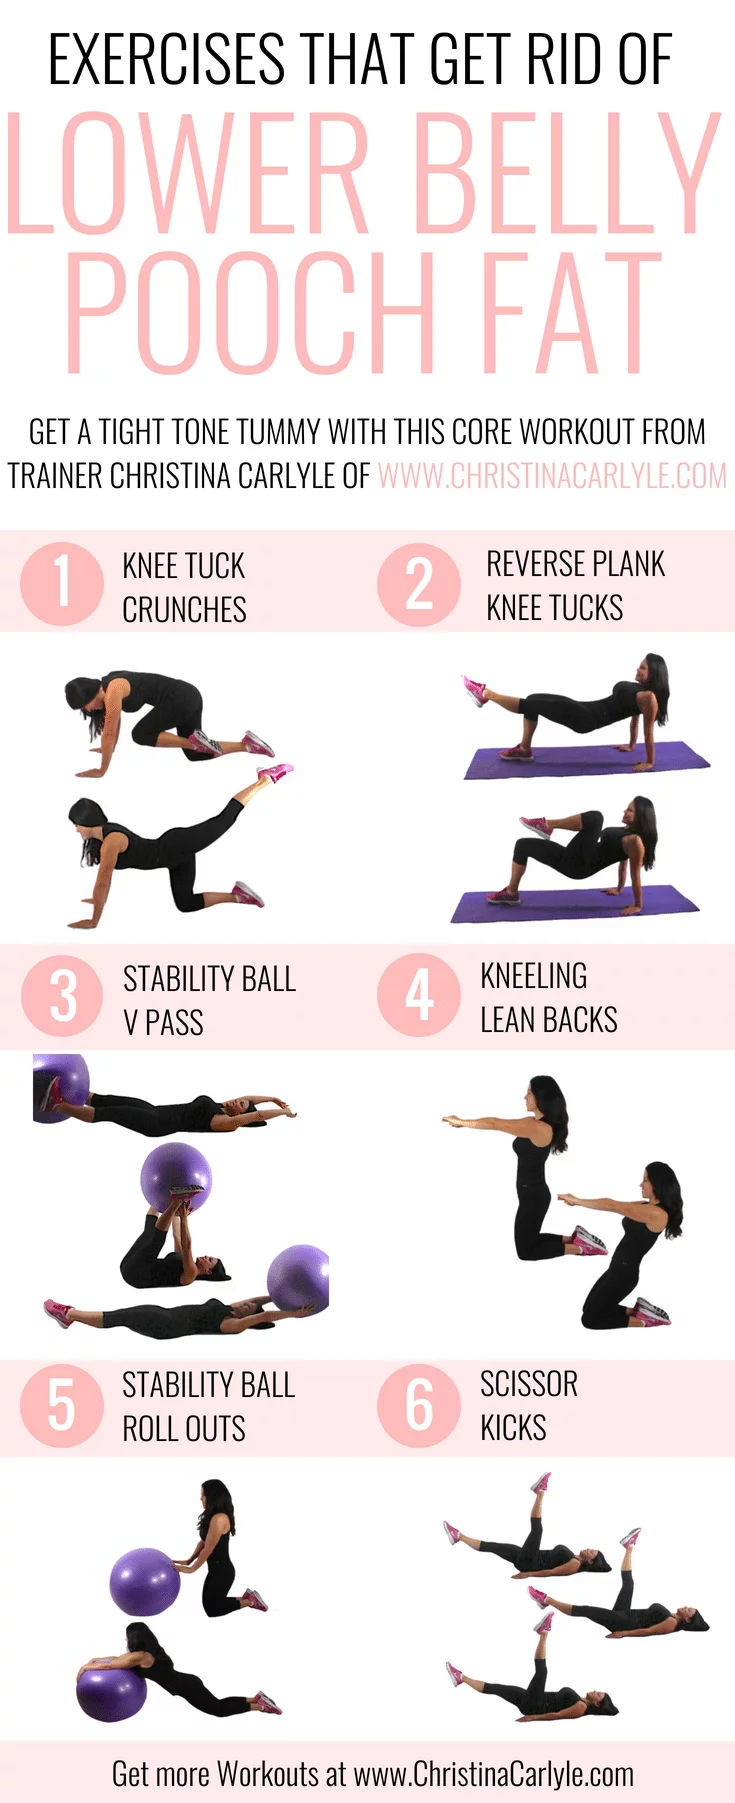 Exercises that Get Rid of Lower Belly (Pooch) Fat - Christina Carlyle